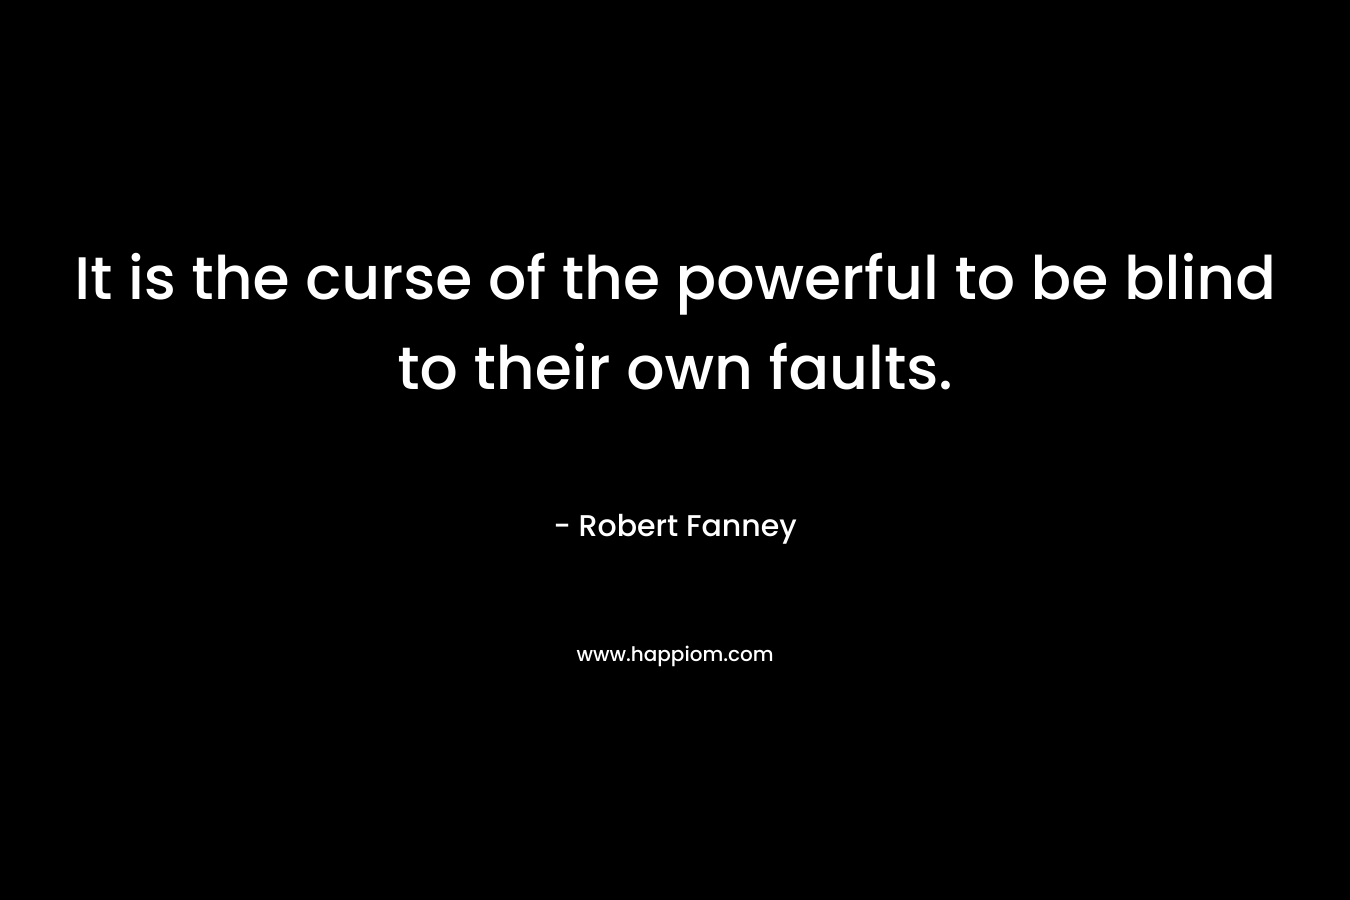 It is the curse of the powerful to be blind to their own faults.